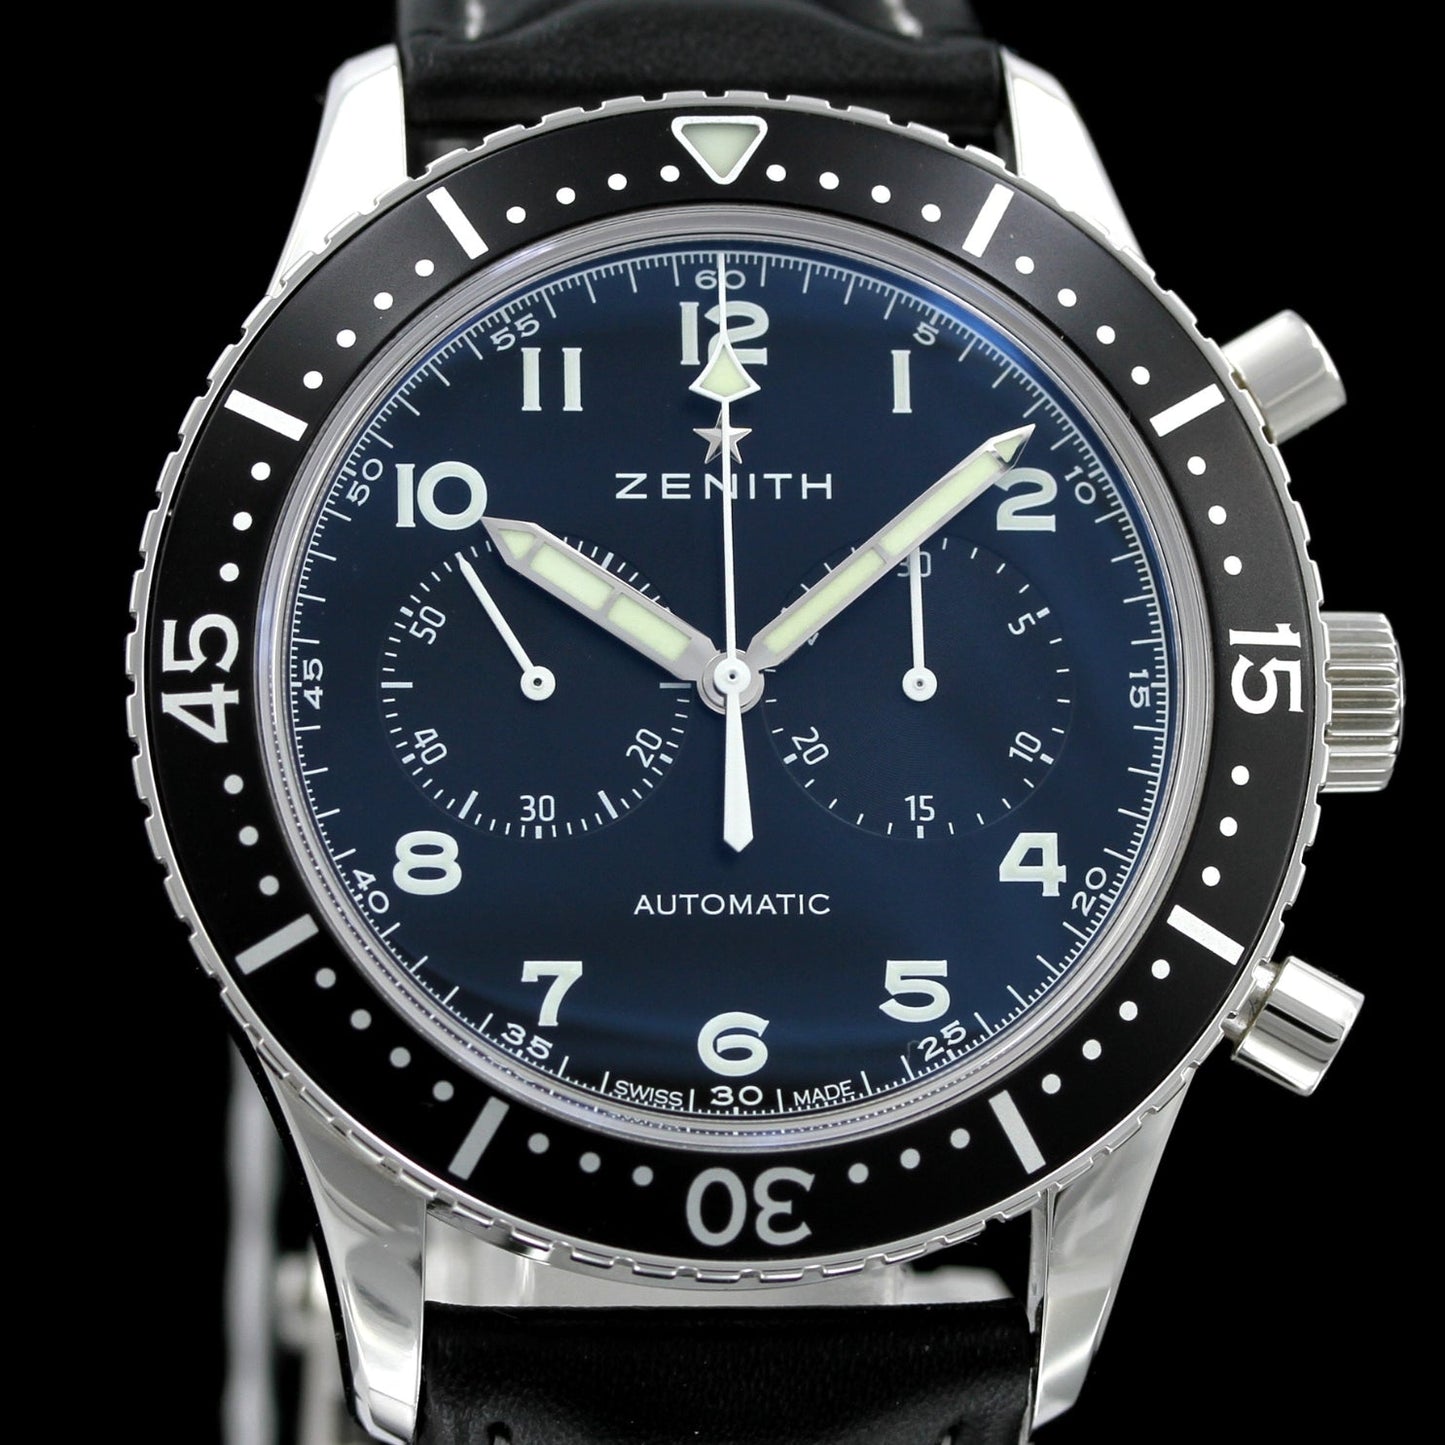 Zenith Pilot Chronometro Tipo Heritage Revival CP-2, Limited 1 out of 1000, 11-2019, Ref. 03.2240.4069/21.C774, B+P